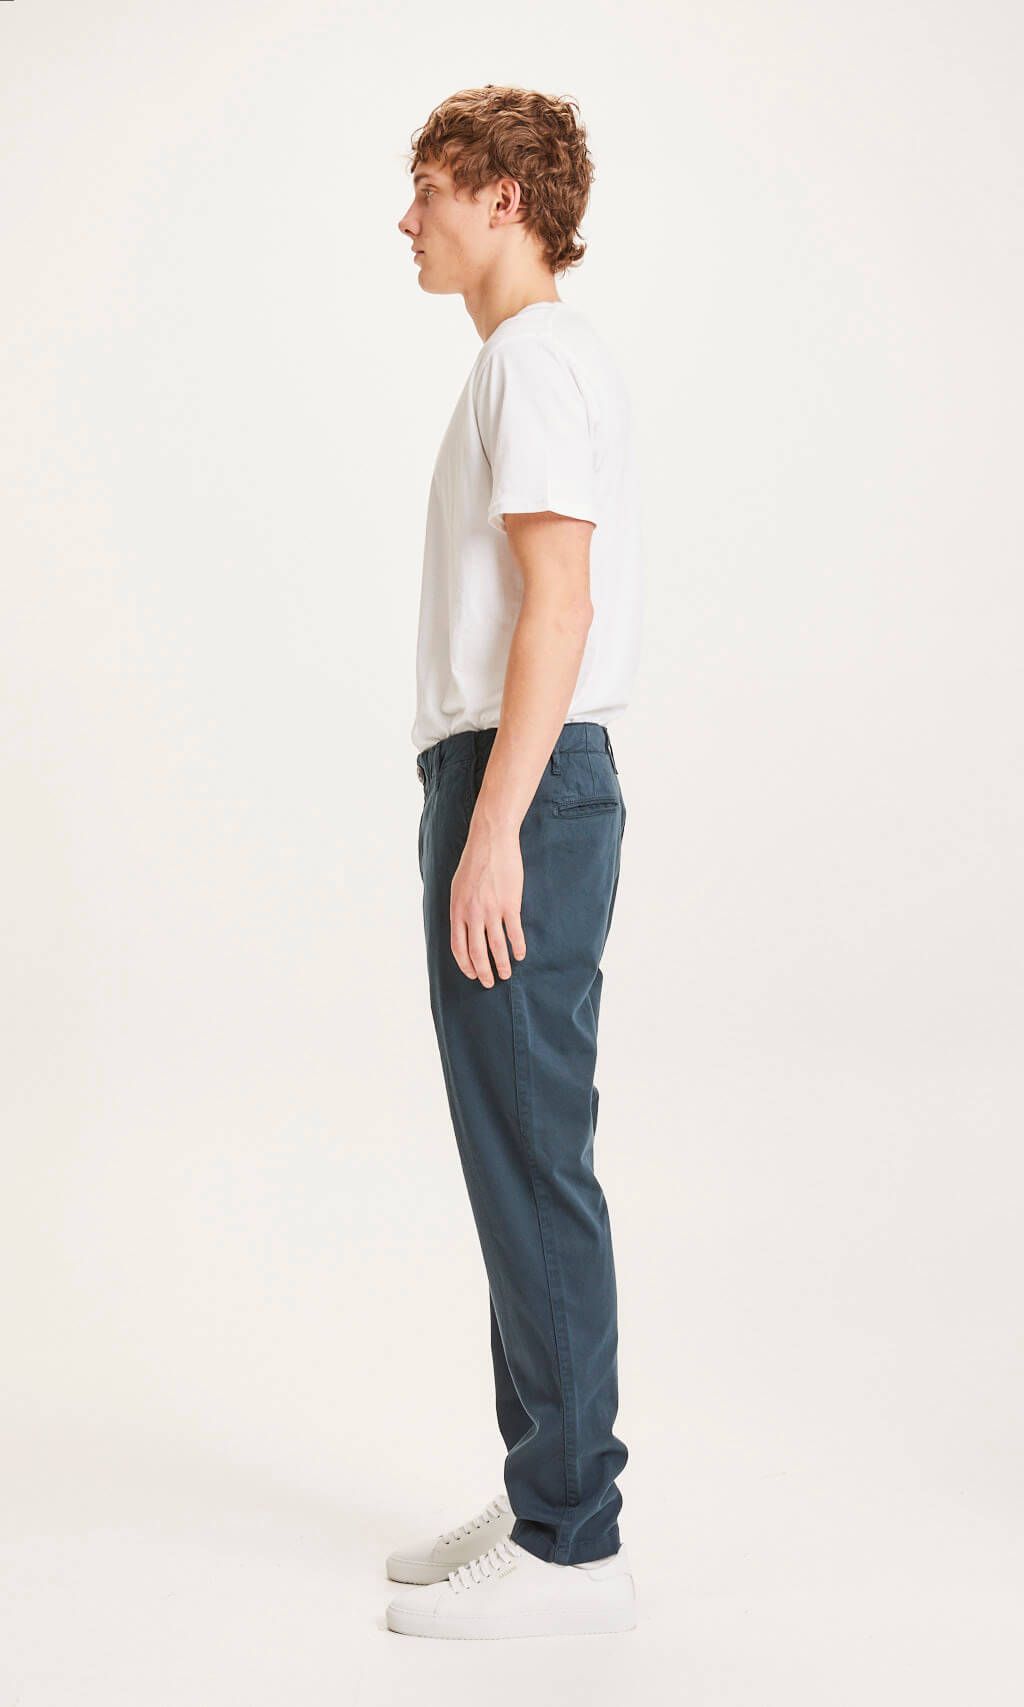 Chuck Regular Stretched Chino Pant Total Eclipse 31/34